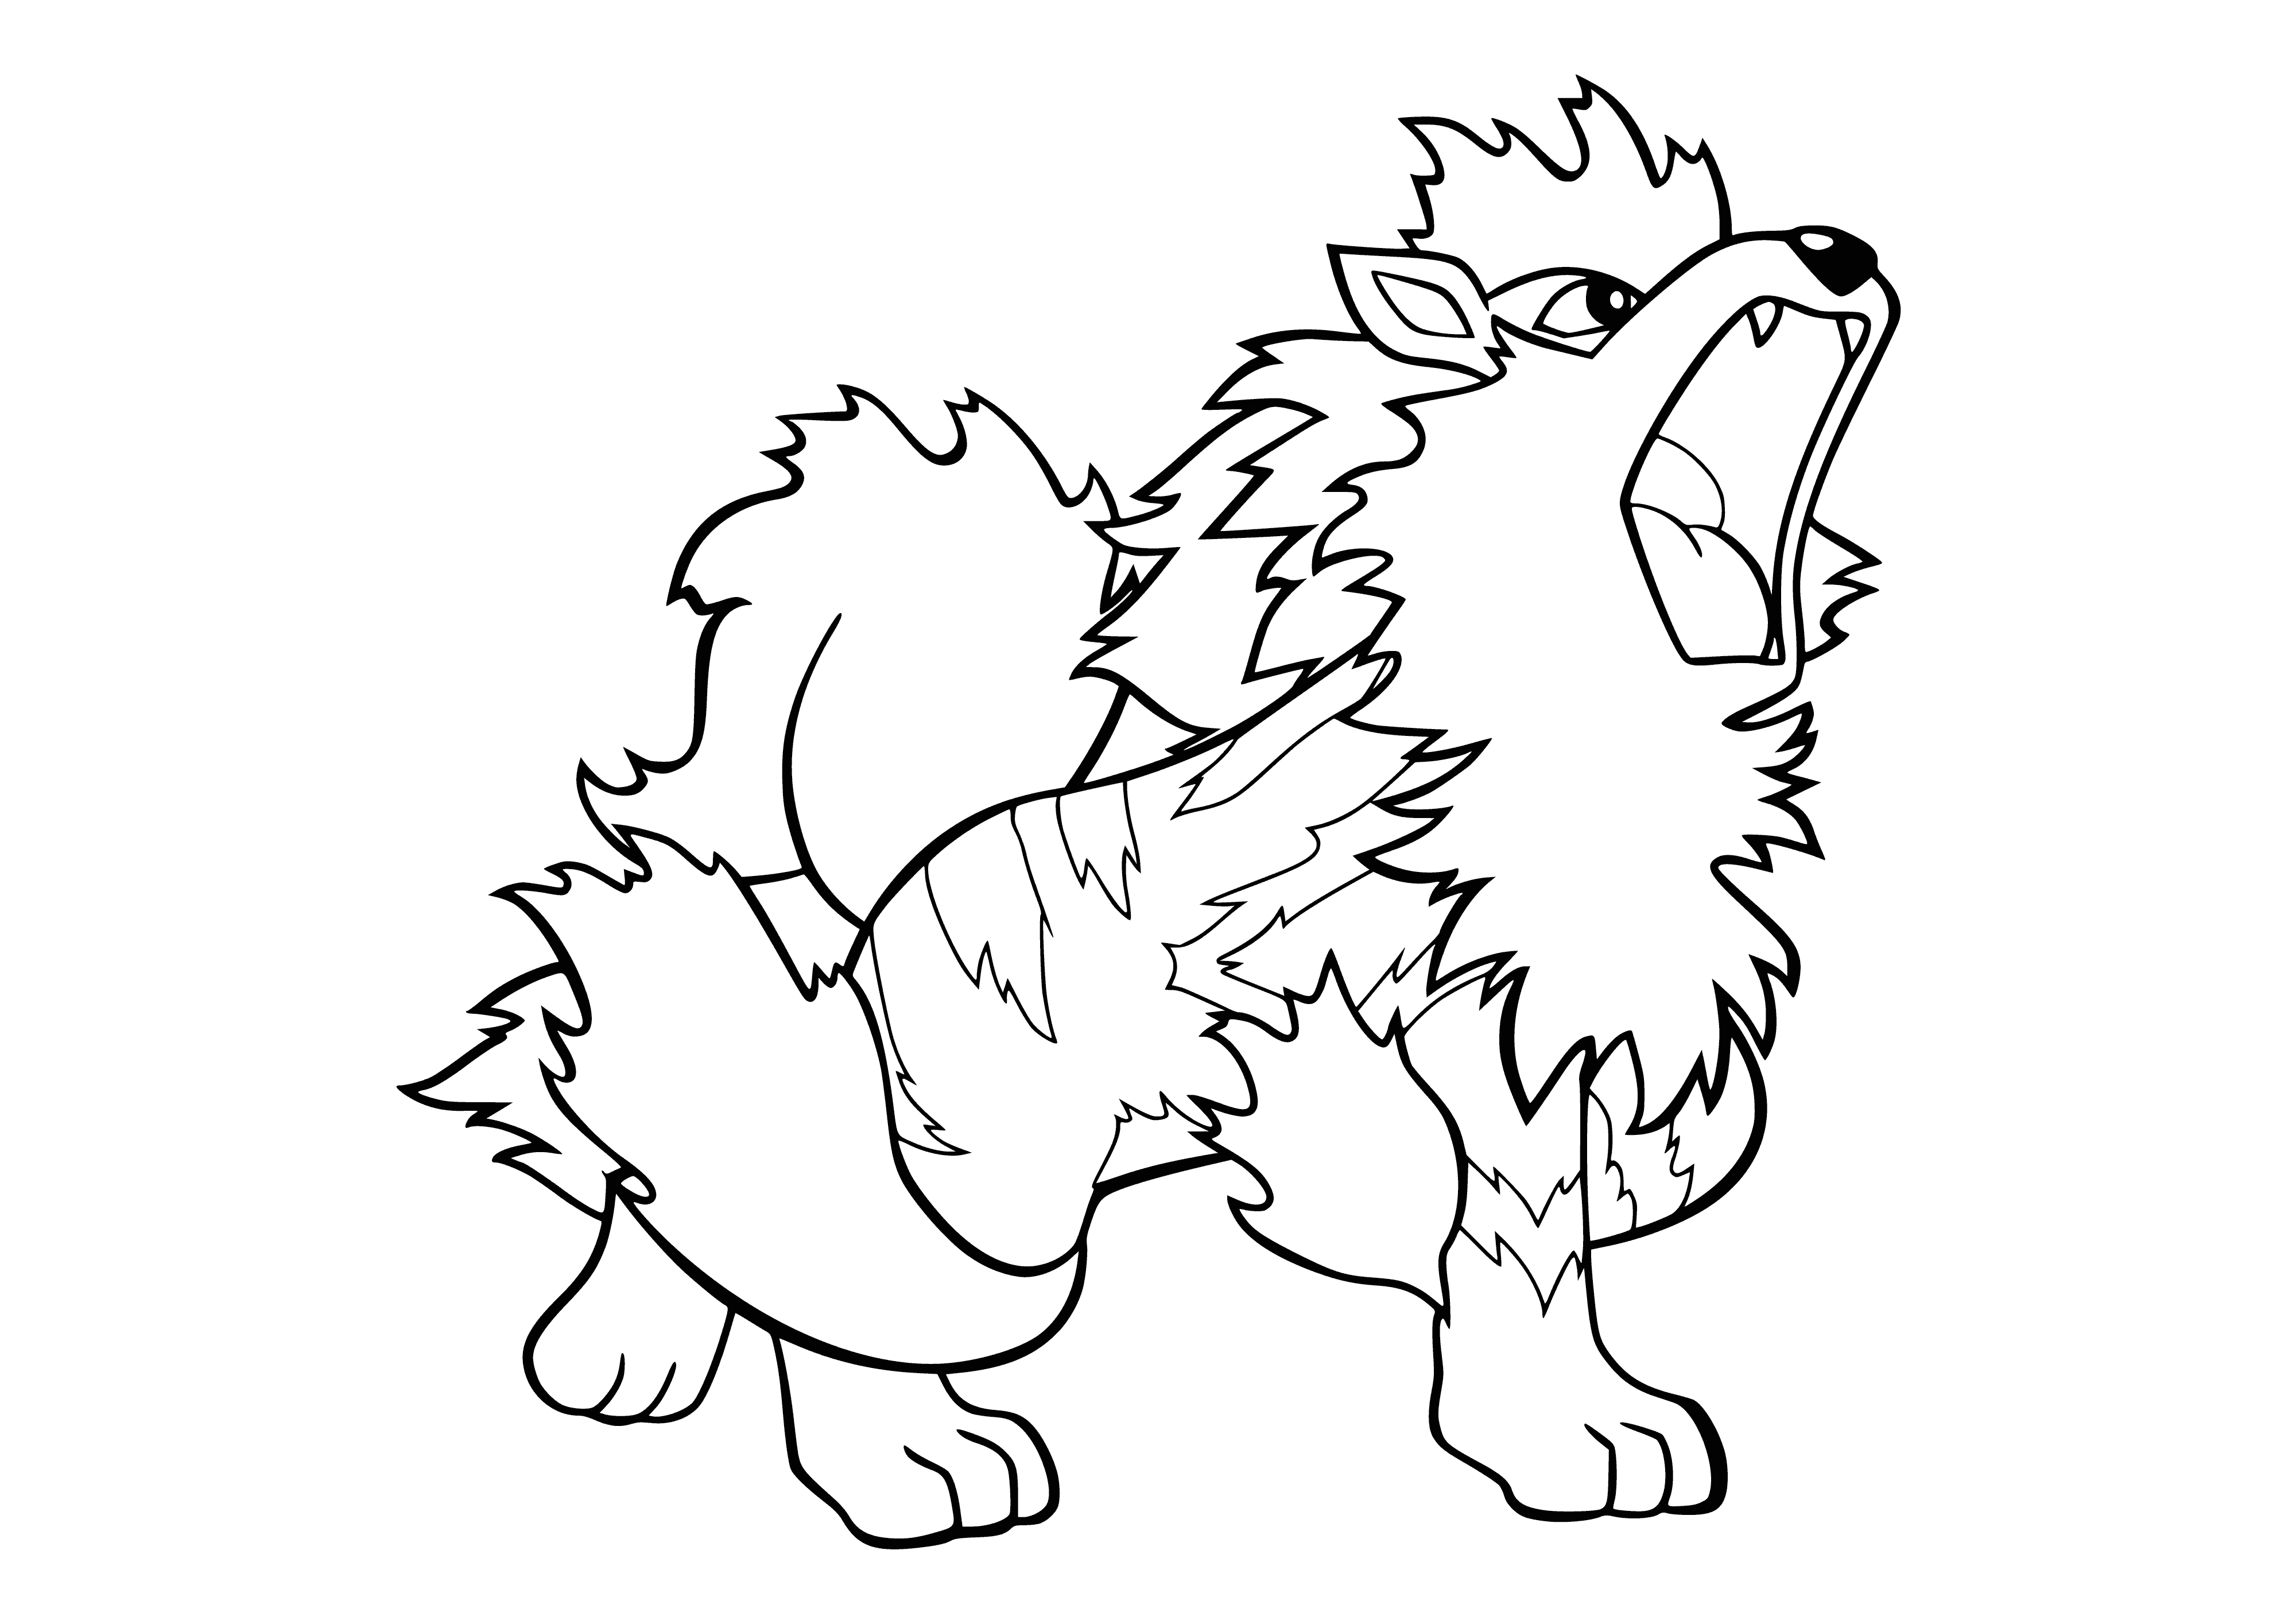 coloring page: Possible summary: Large, orange-black canine Pokémon with long snout, bushy tail, navy blue paws & white tufts of fur on its shoulders and head. Red eyes, black stripes, white paw pads.